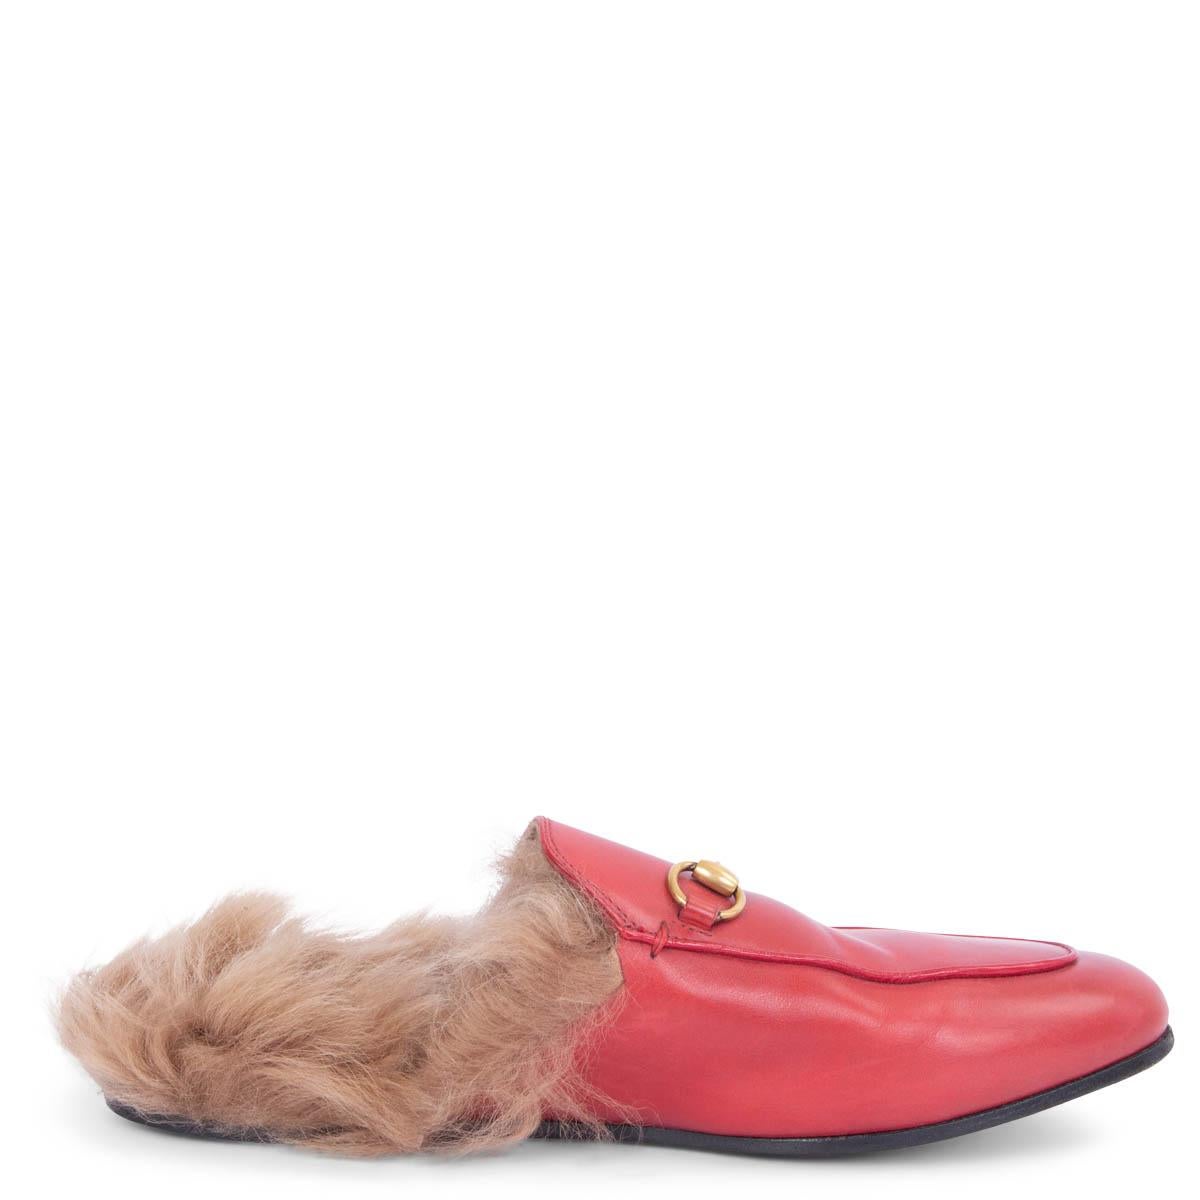 GUCCI red leather FUR TRIM PRINCETOWN Slippers Flats Shoes 38 1